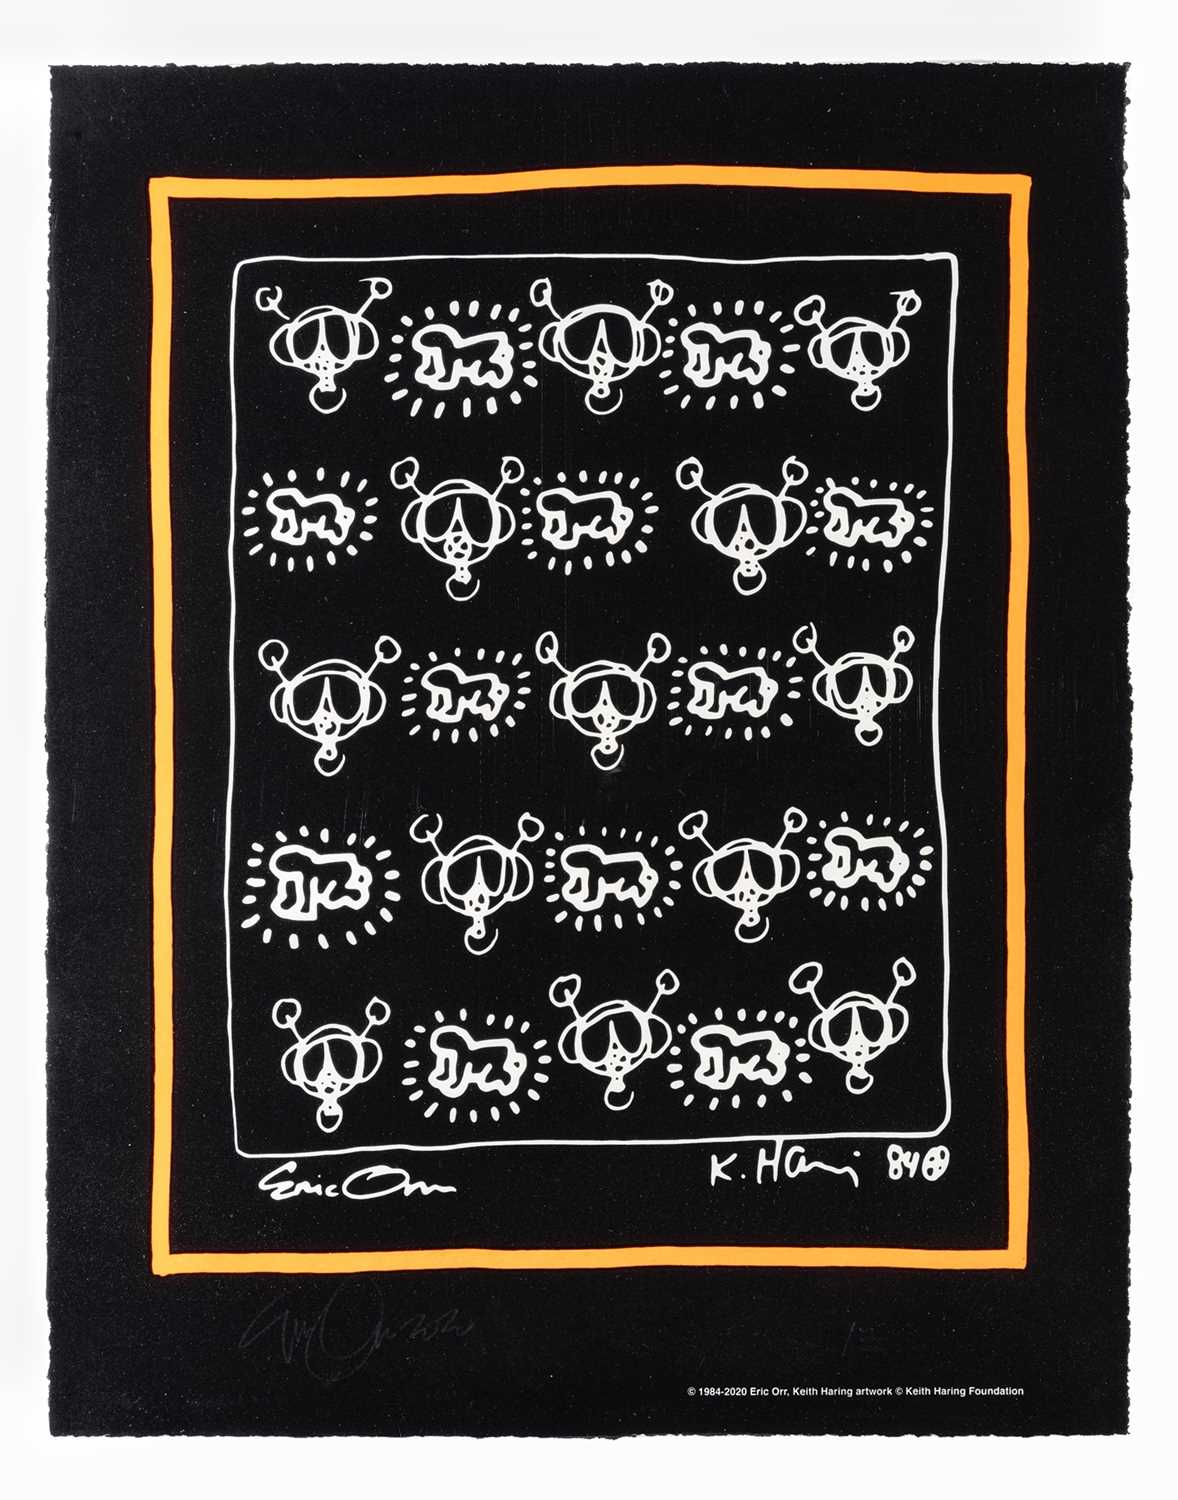 Lot 77 - Keith Haring & Eric Orr (Collaboration), 'Repeat', 2020